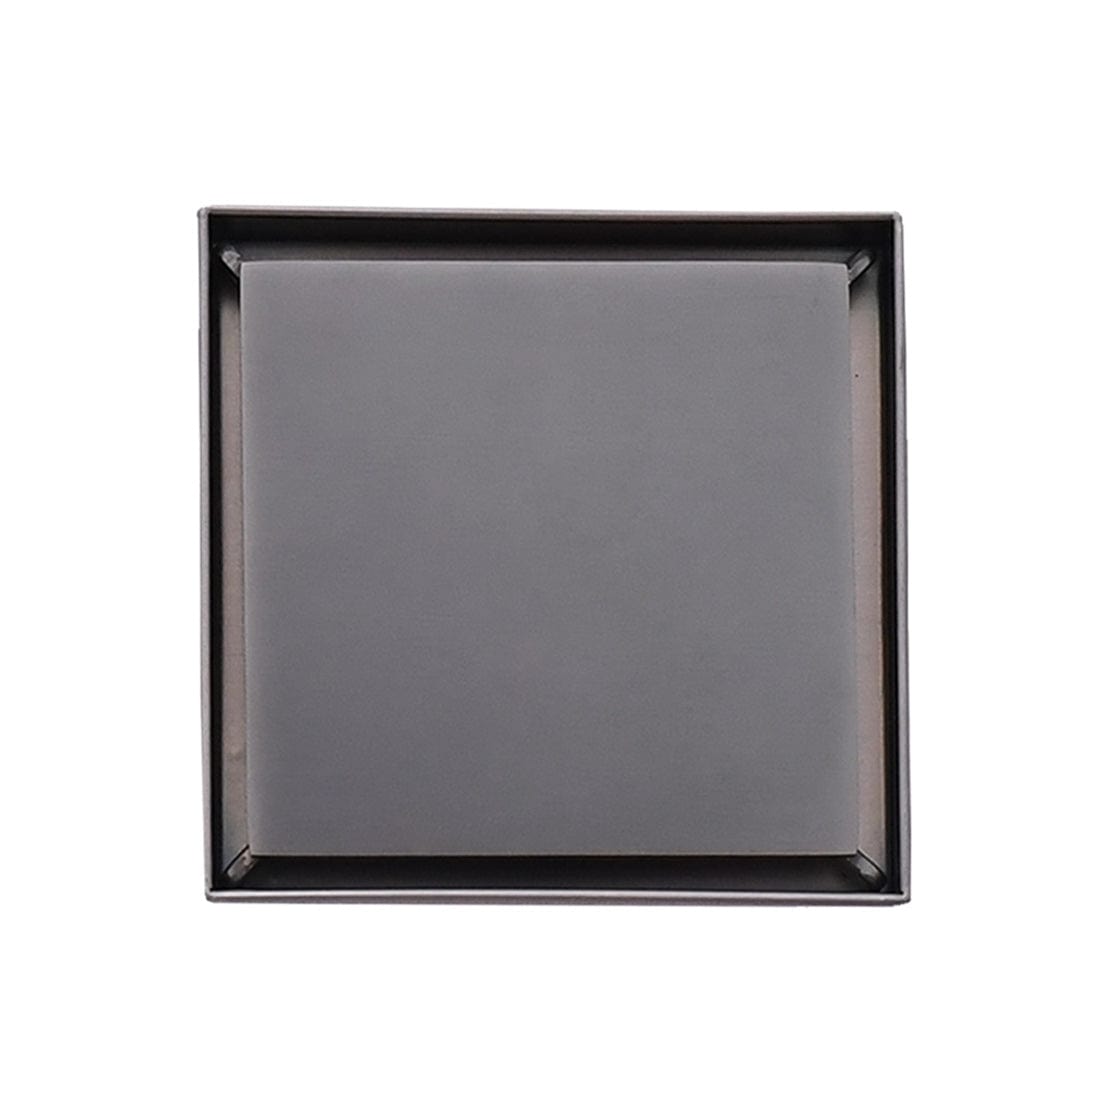 Tranquillity Bathroom Accessories Tranquillity Point Drain | Brushed Gunmetal